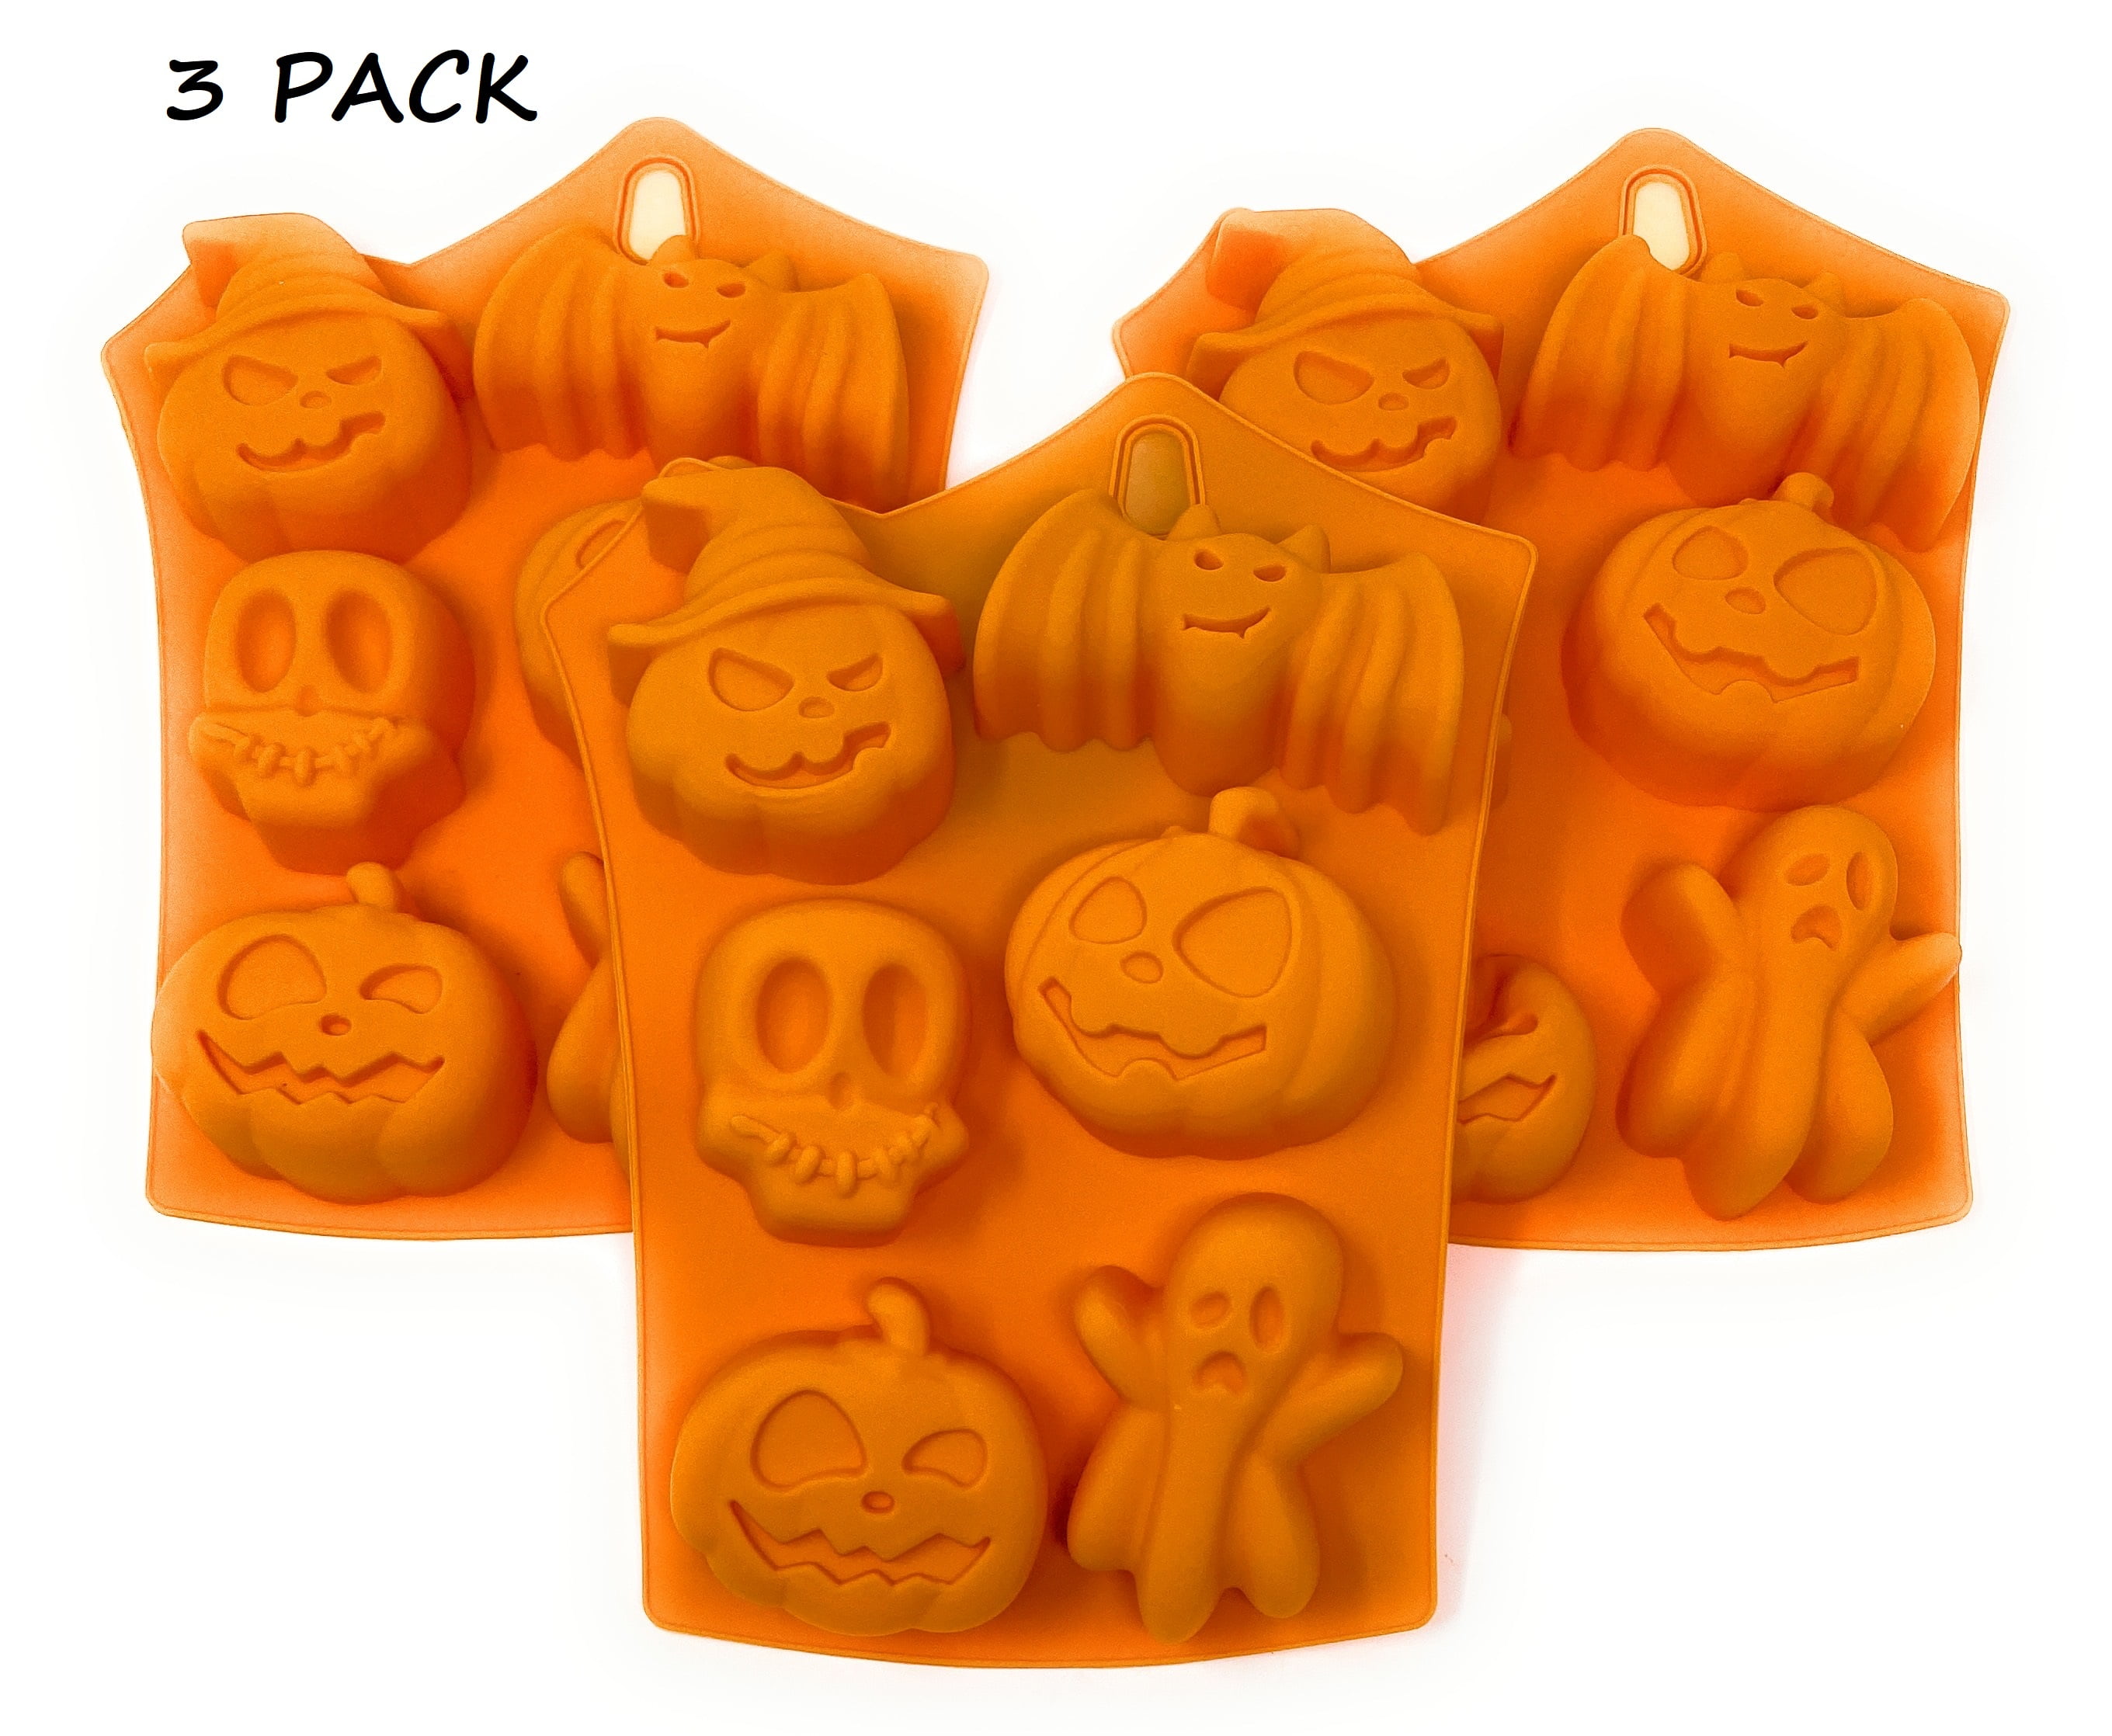 3 Pack Halloween Silicone Mold Bundle: Includes 3 Halloween Molds ...